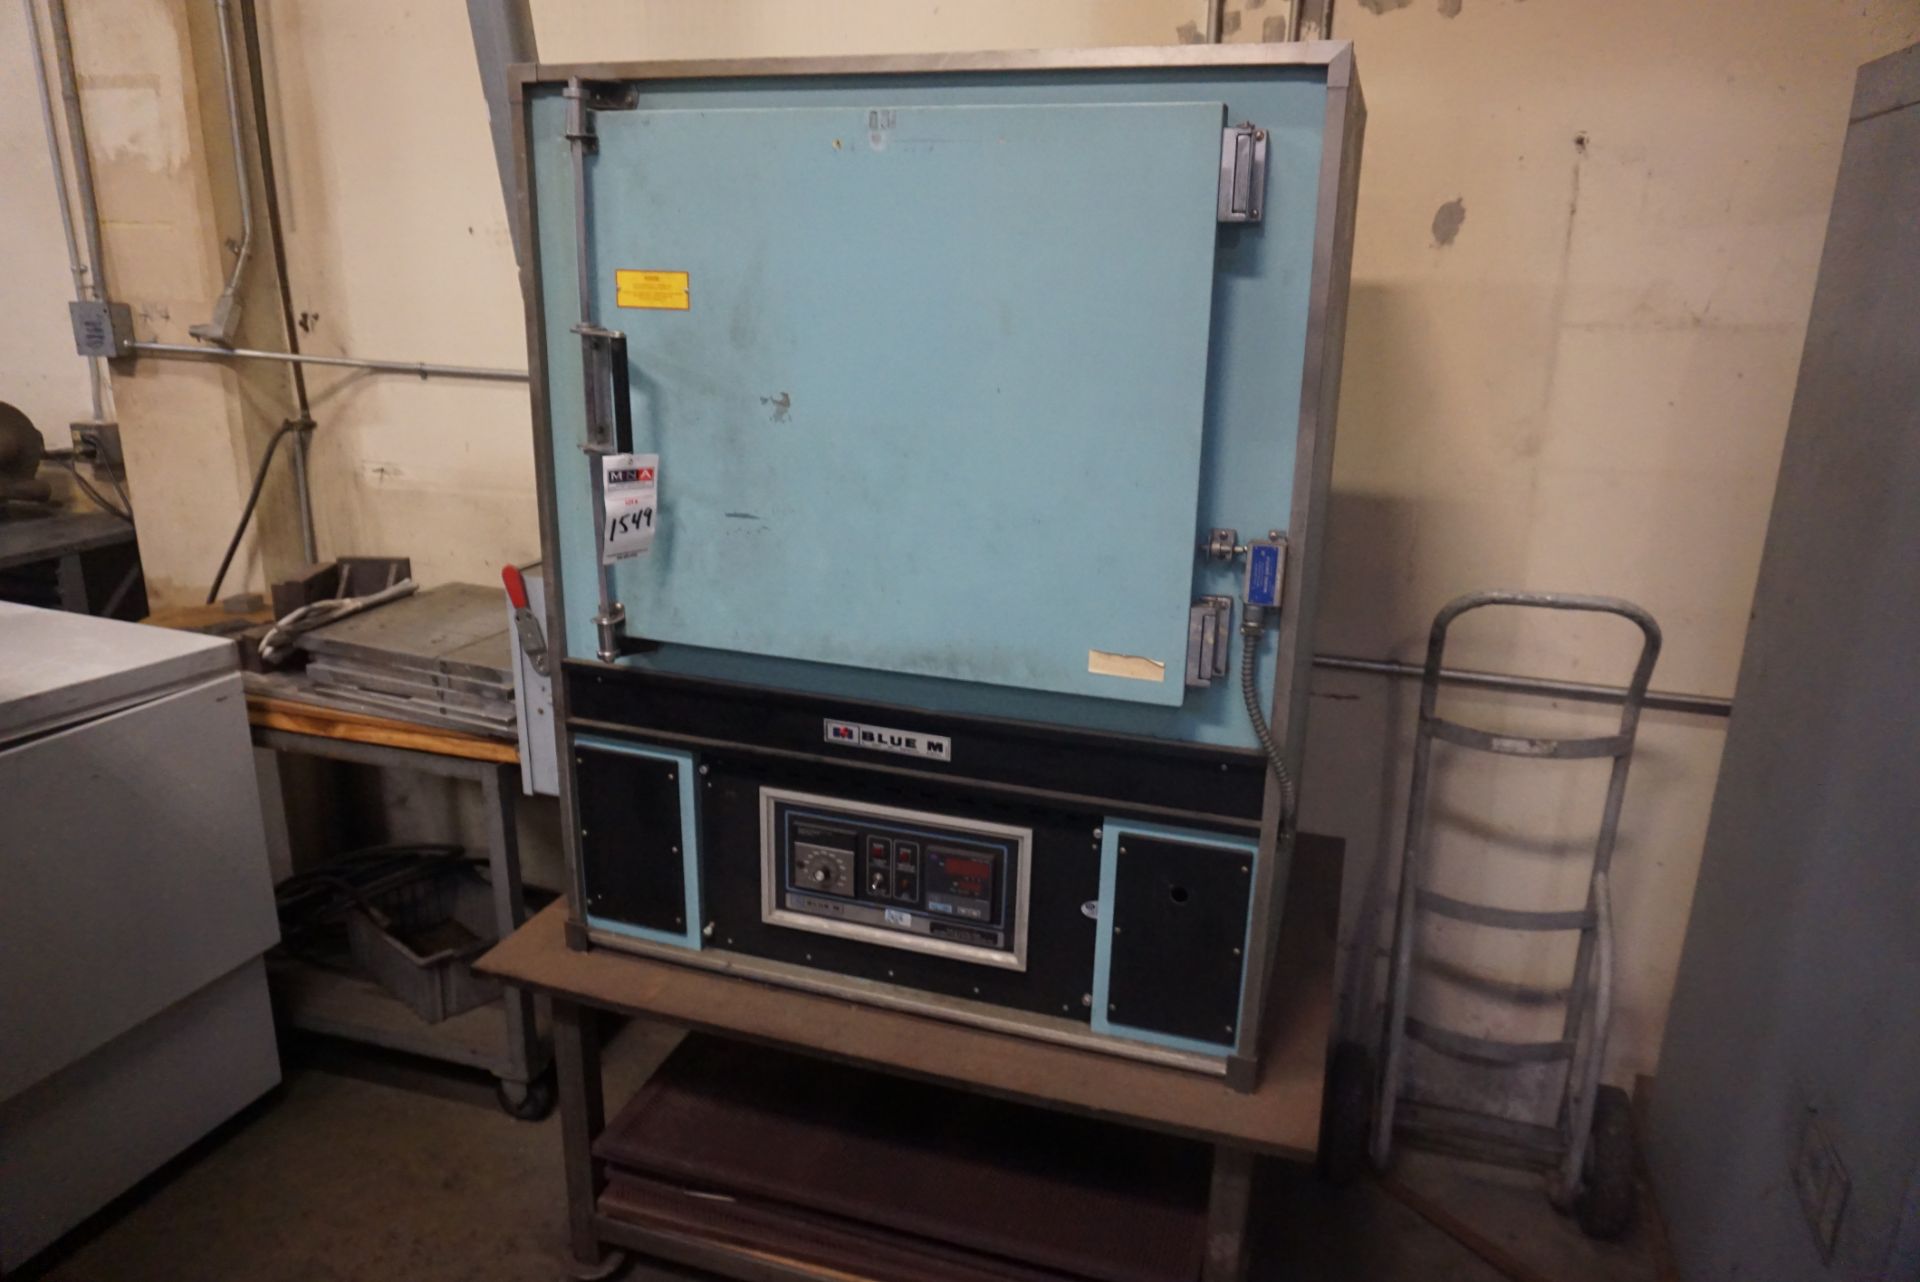 Blue M DC256C 650 Degree Max. Temp. Convection Oven, s/n DC3476 - Image 3 of 5